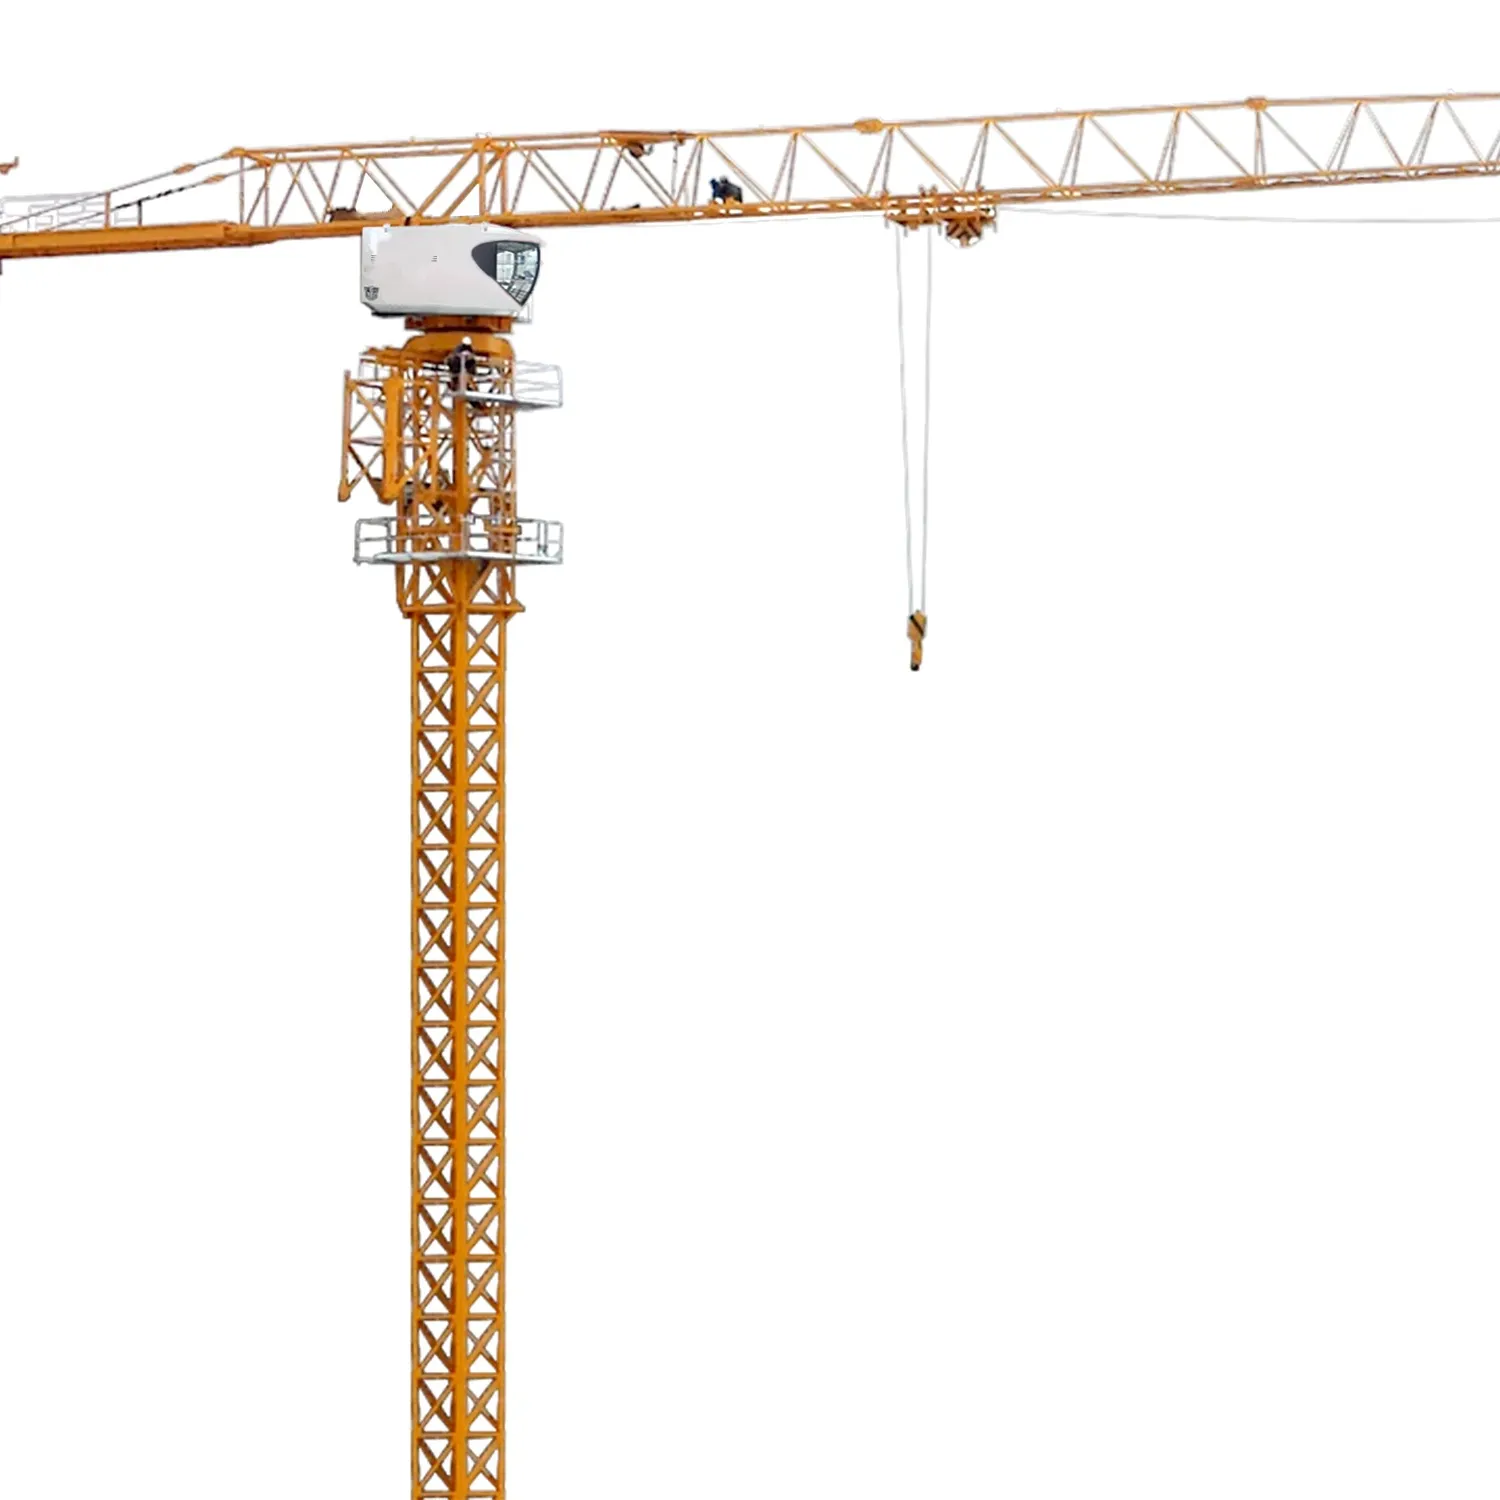 China manufacture outdoor popular lifing equipmend machinery Flat-Top tower crane